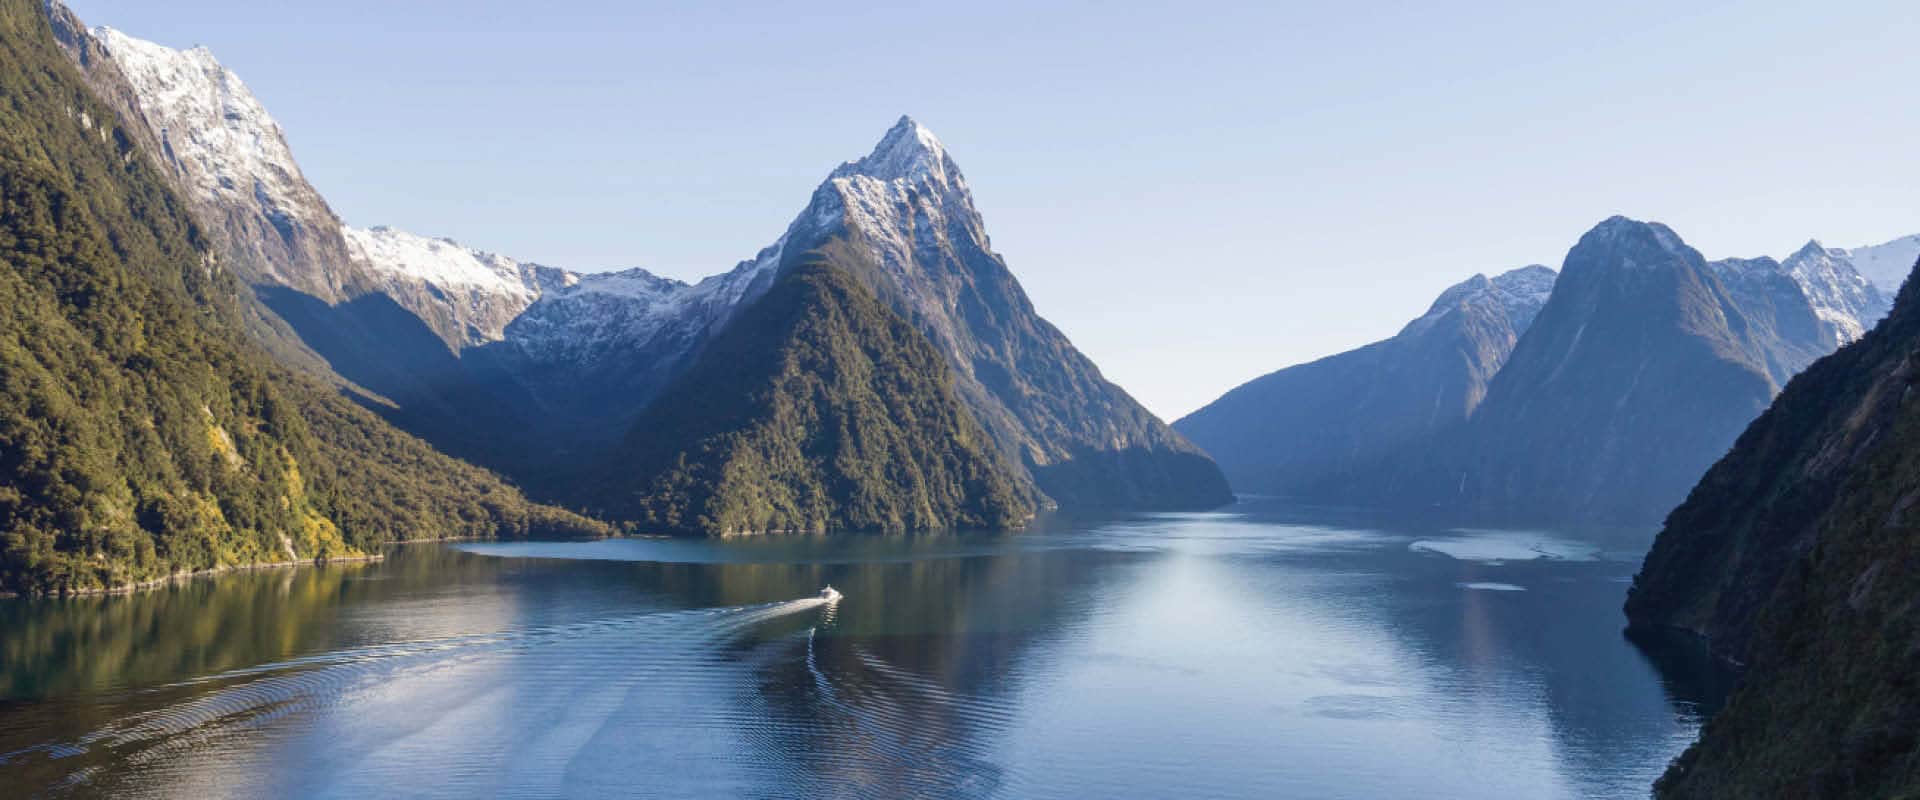 Long distance view of Milford Sound depicting the mountains